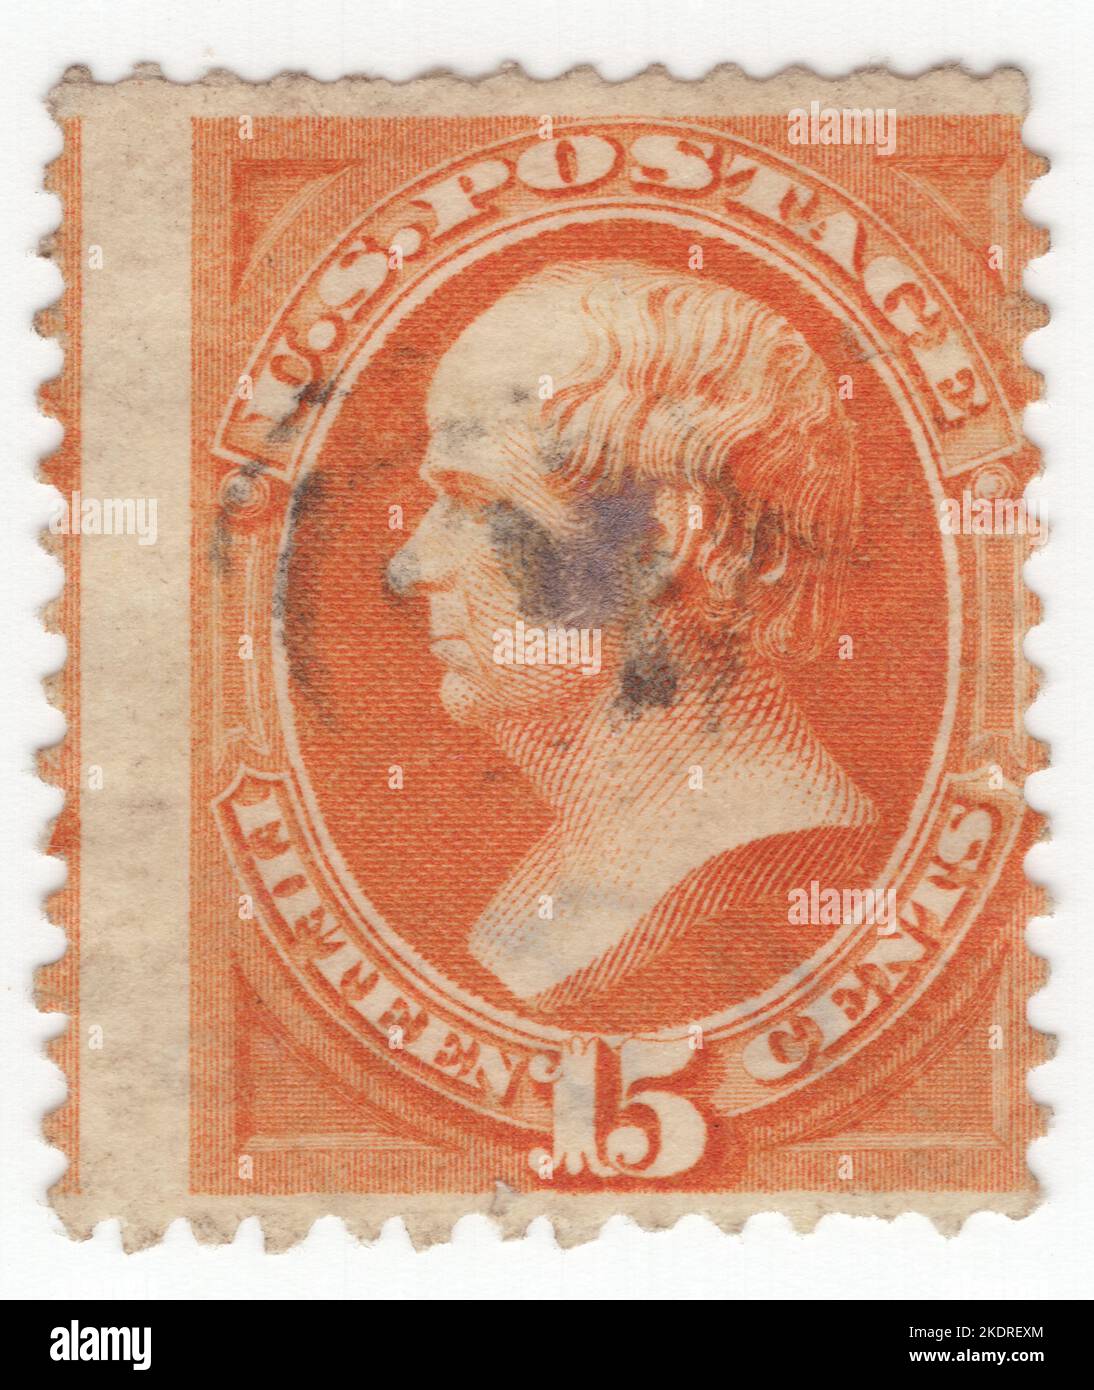 USA - 1870: An 15 cents bright orange postage stamp depicting portrait of Daniel Webster, American lawyer and statesman who represented New Hampshire and Massachusetts in the U.S. Congress and served as the U.S. Secretary of State under Presidents William Henry Harrison, John Tyler, and Millard Fillmore. Webster was one of the most prominent American lawyers of the 19th century, and argued over 200 cases before the U.S. Supreme Court between 1814 and his death in 1852. During his life, he was a member of the Federalist Party, the National Republican Party, and the Whig Party Stock Photo